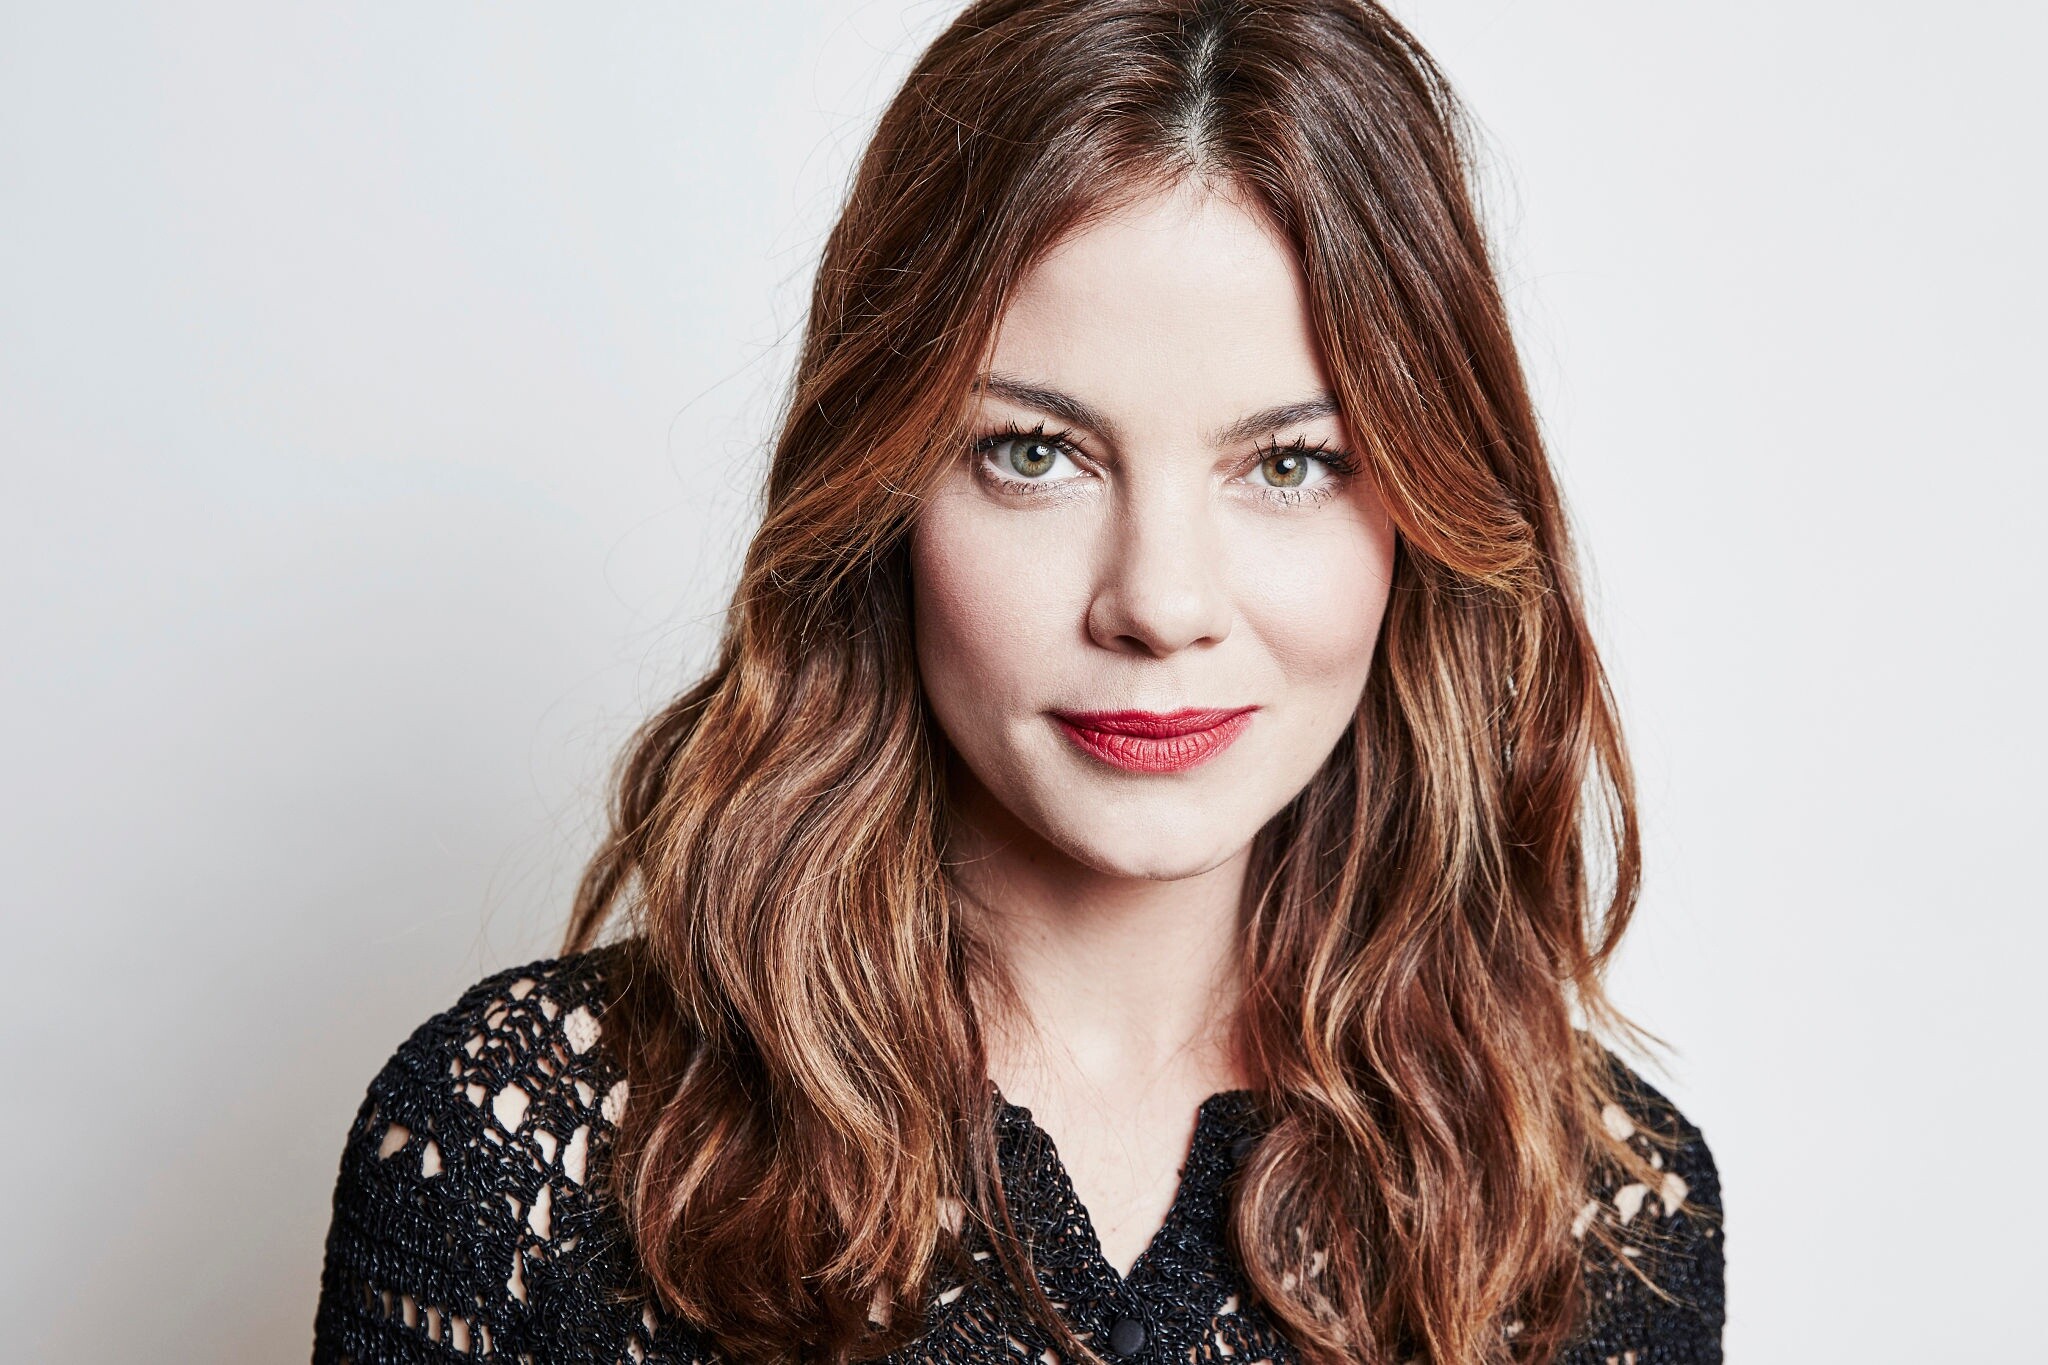 Michelle Monaghan: The anthology crime drama, True Detective (2014), Golden Globes nomination for Best Supporting Actress, 2015. 2050x1370 HD Wallpaper.